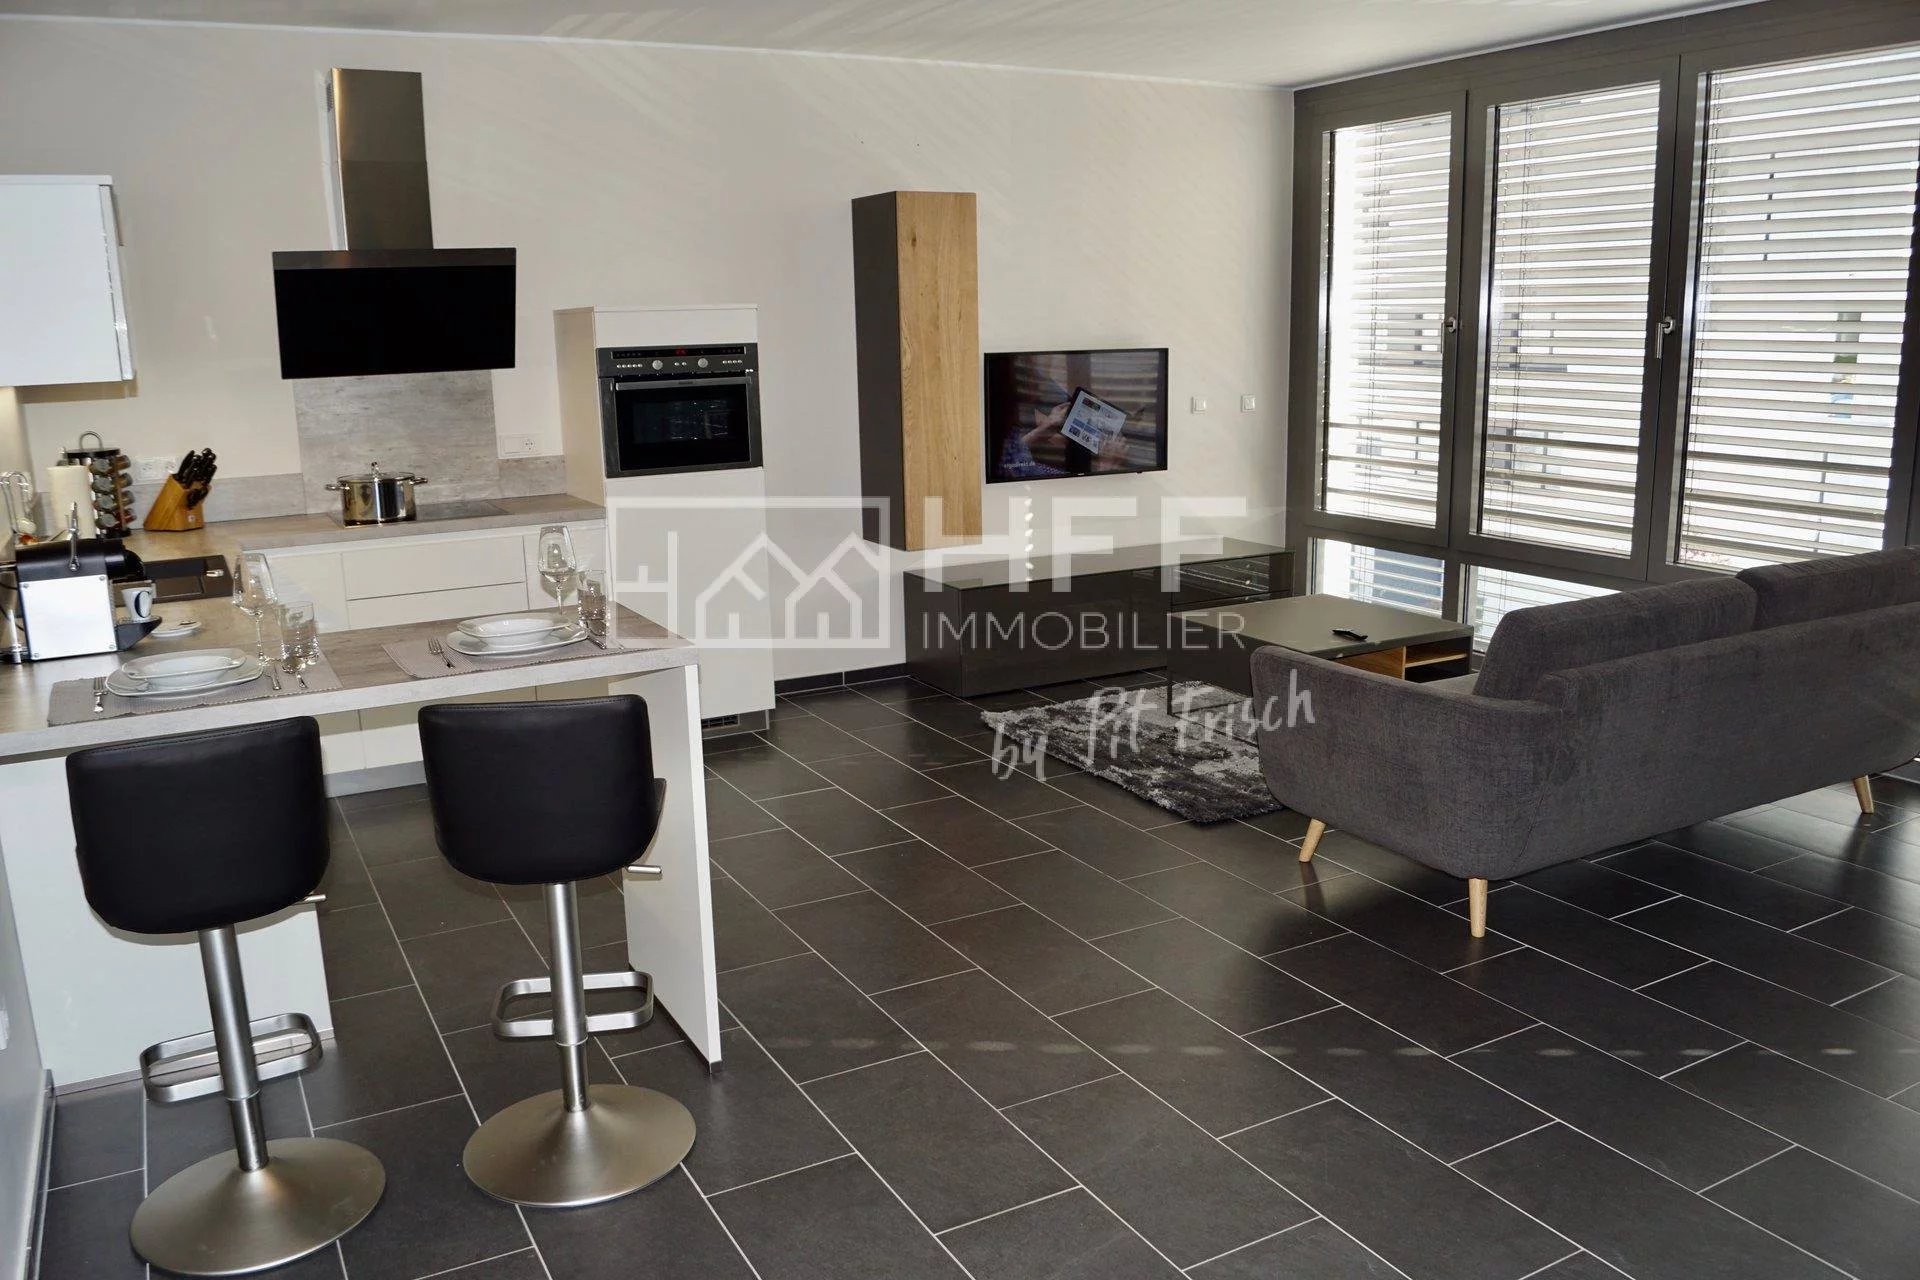 Furnished Service apartment in Luxembourg-Kirchberg